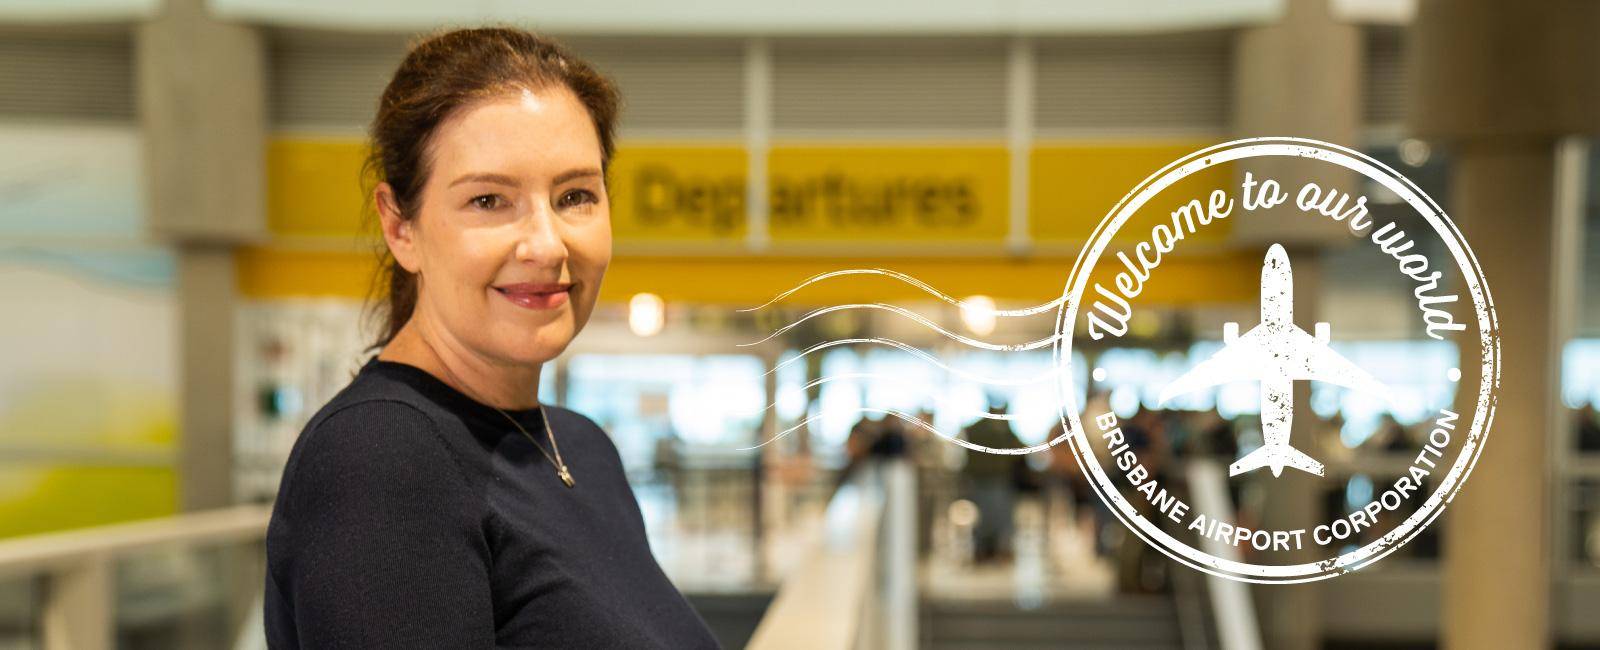 Jodie Punshon at domestic terminal departures Welcome to our World stamp